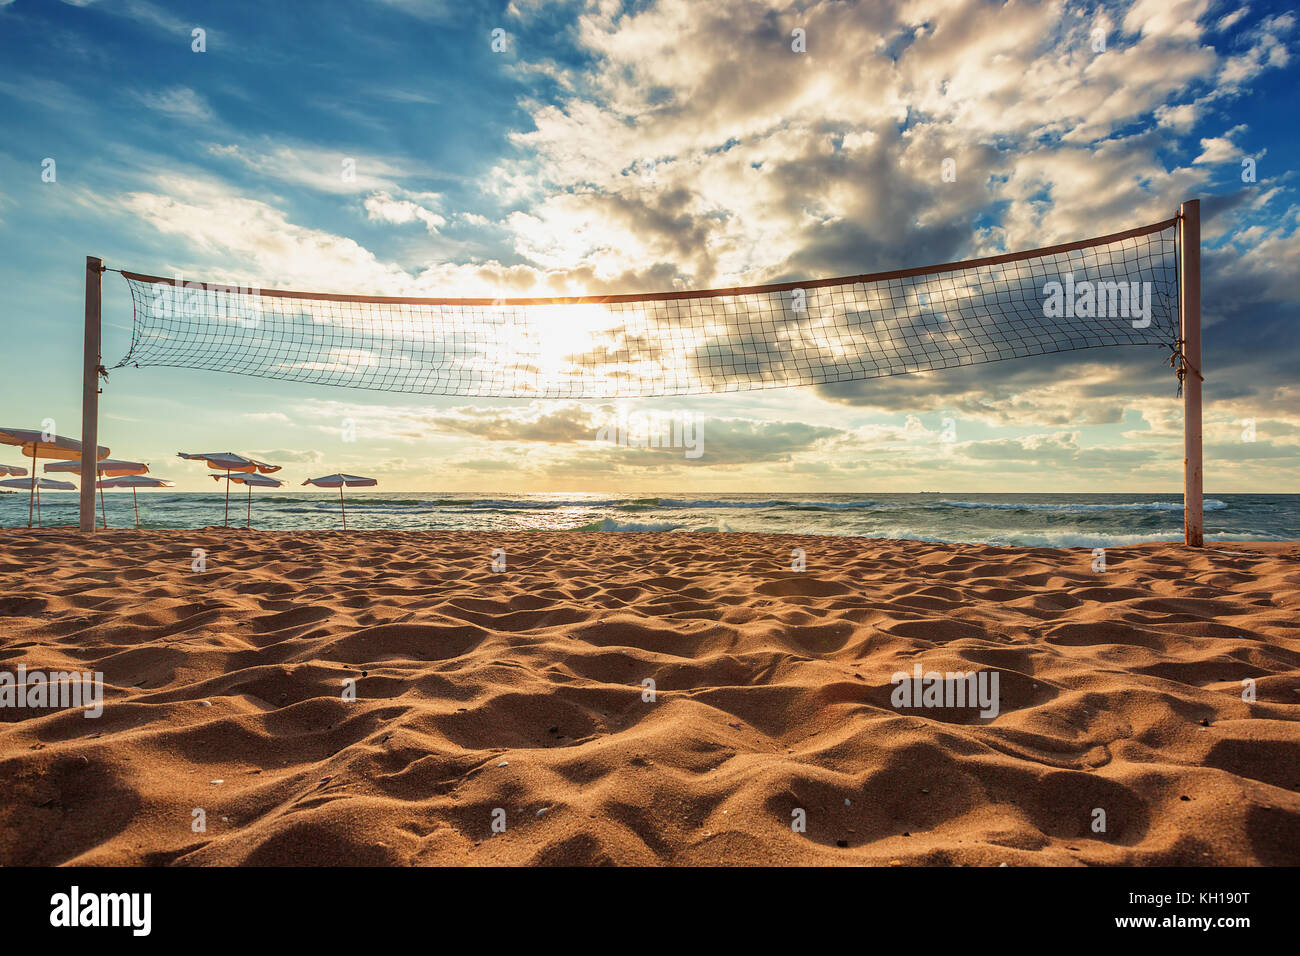 Volleyball net and sunrise on the beach Stock Photo